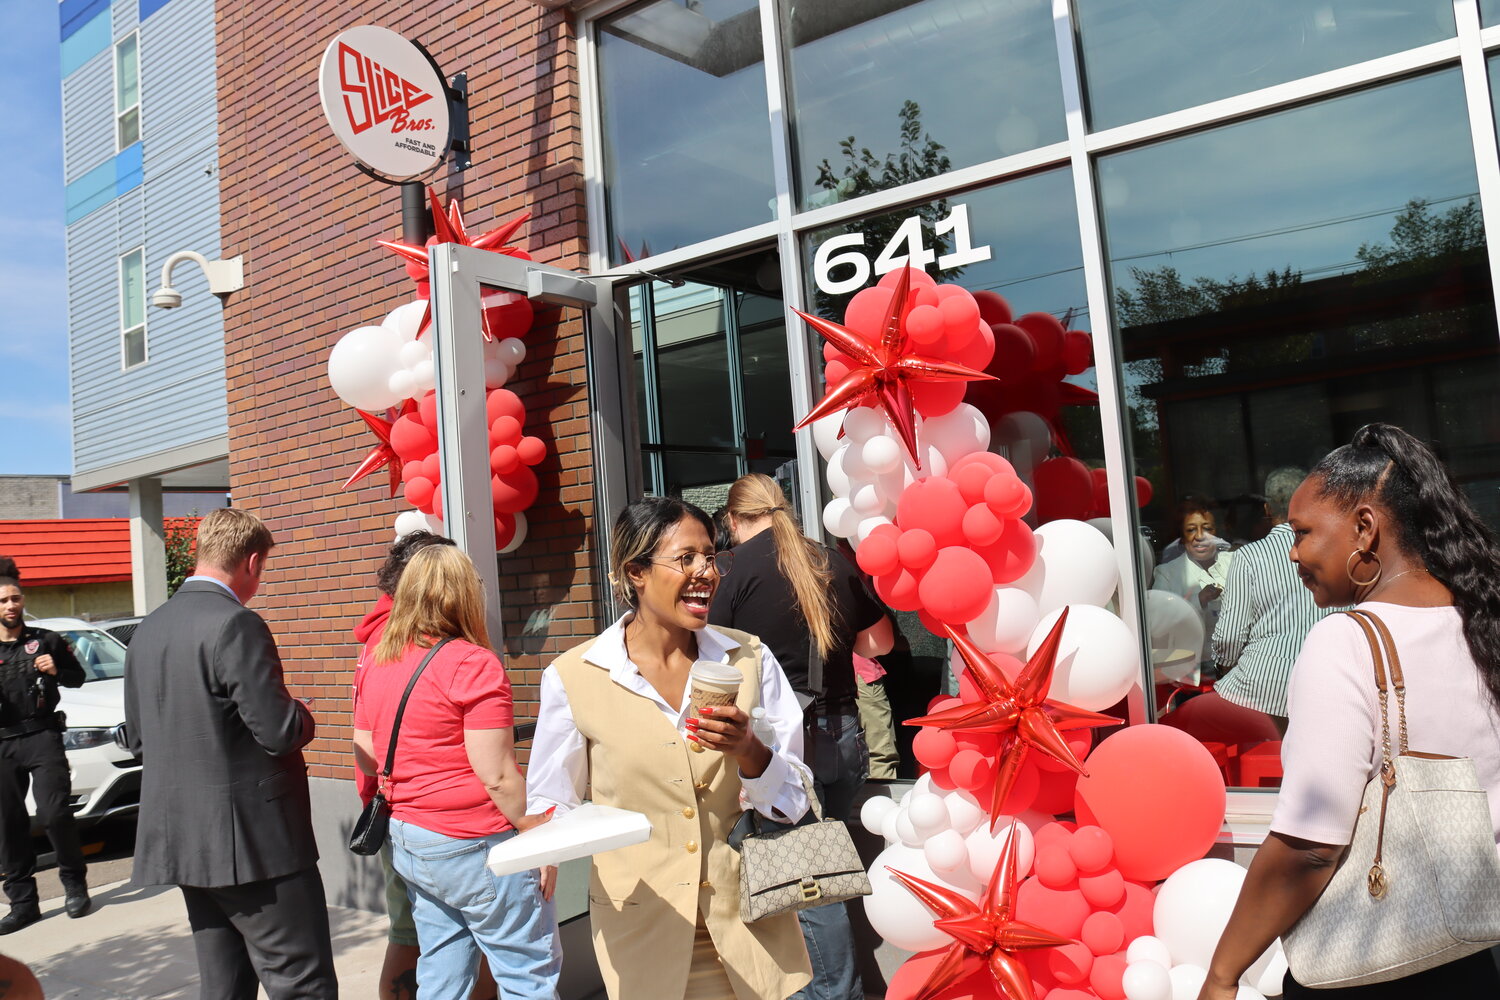 Slice Pizza at 641 University Ave. was packed for the ribbon-cutting on Sept. 15, 2023. (Photo by Tesha M. Christensen)